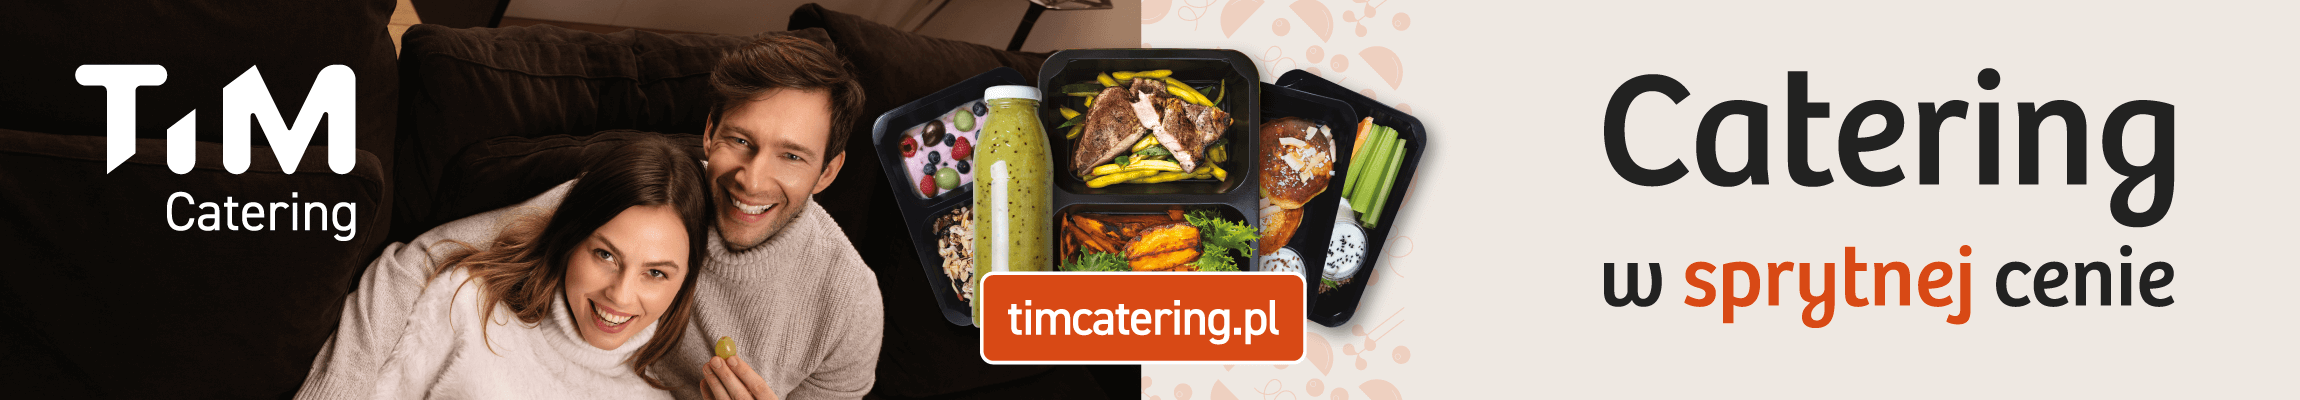 timcatering katering